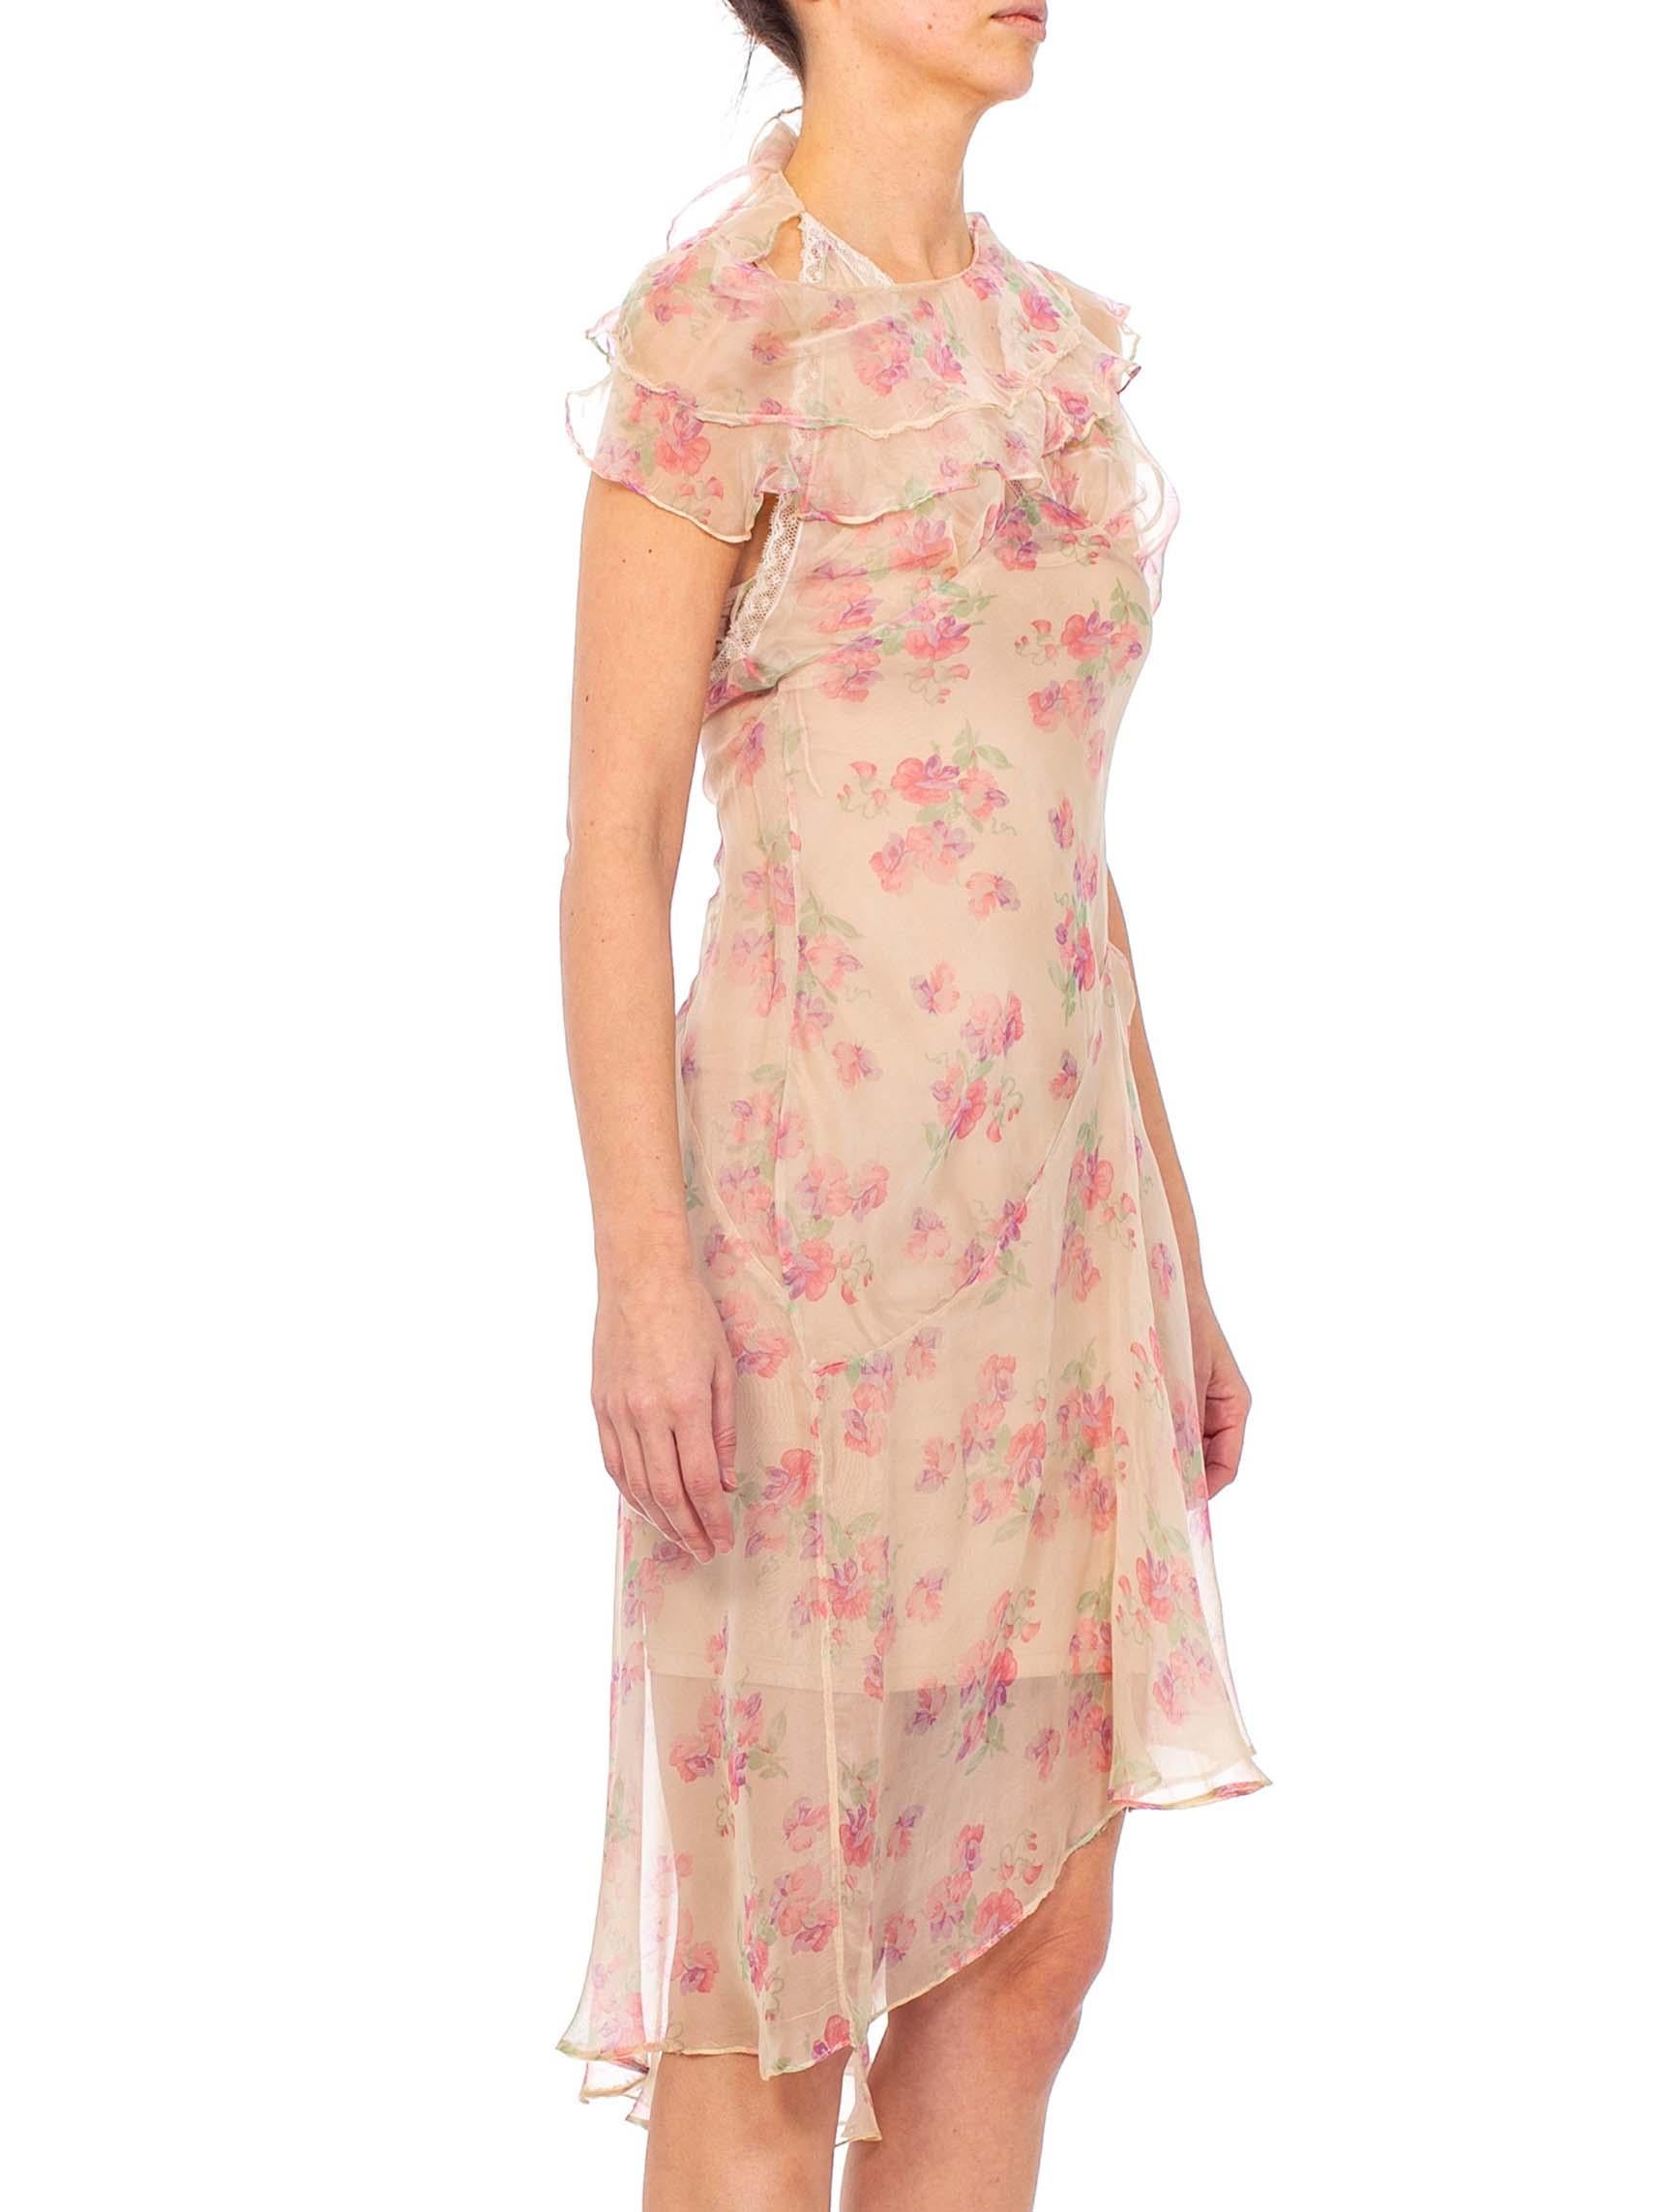 MORPHEW COLLECTION Baby Pink Floral Silk Chiffon Dress With Ruffle Cape Back In Excellent Condition In New York, NY